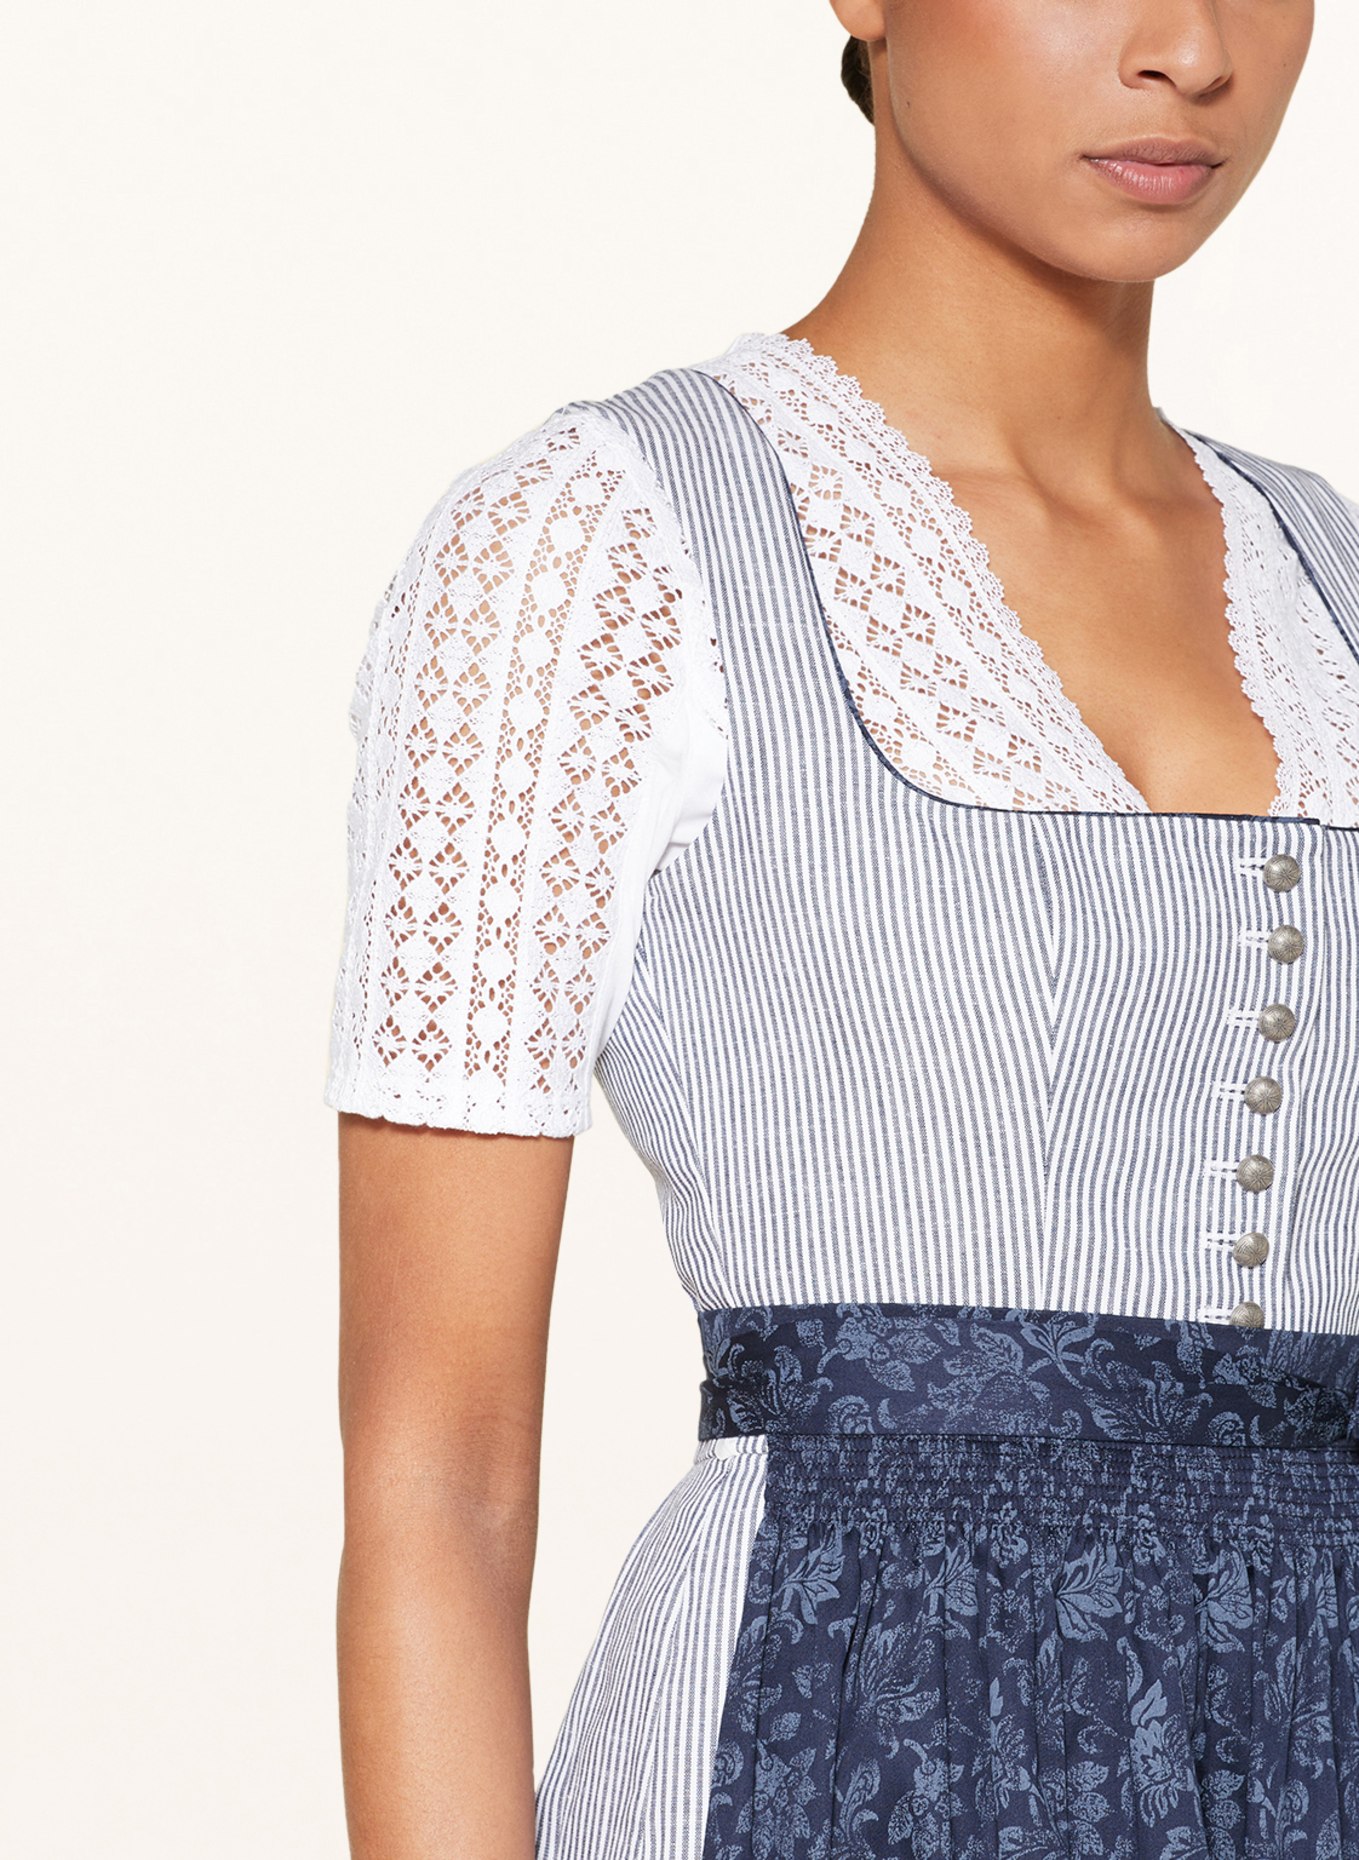 WALDORFF Dirndl blouse made of crochet lace in white